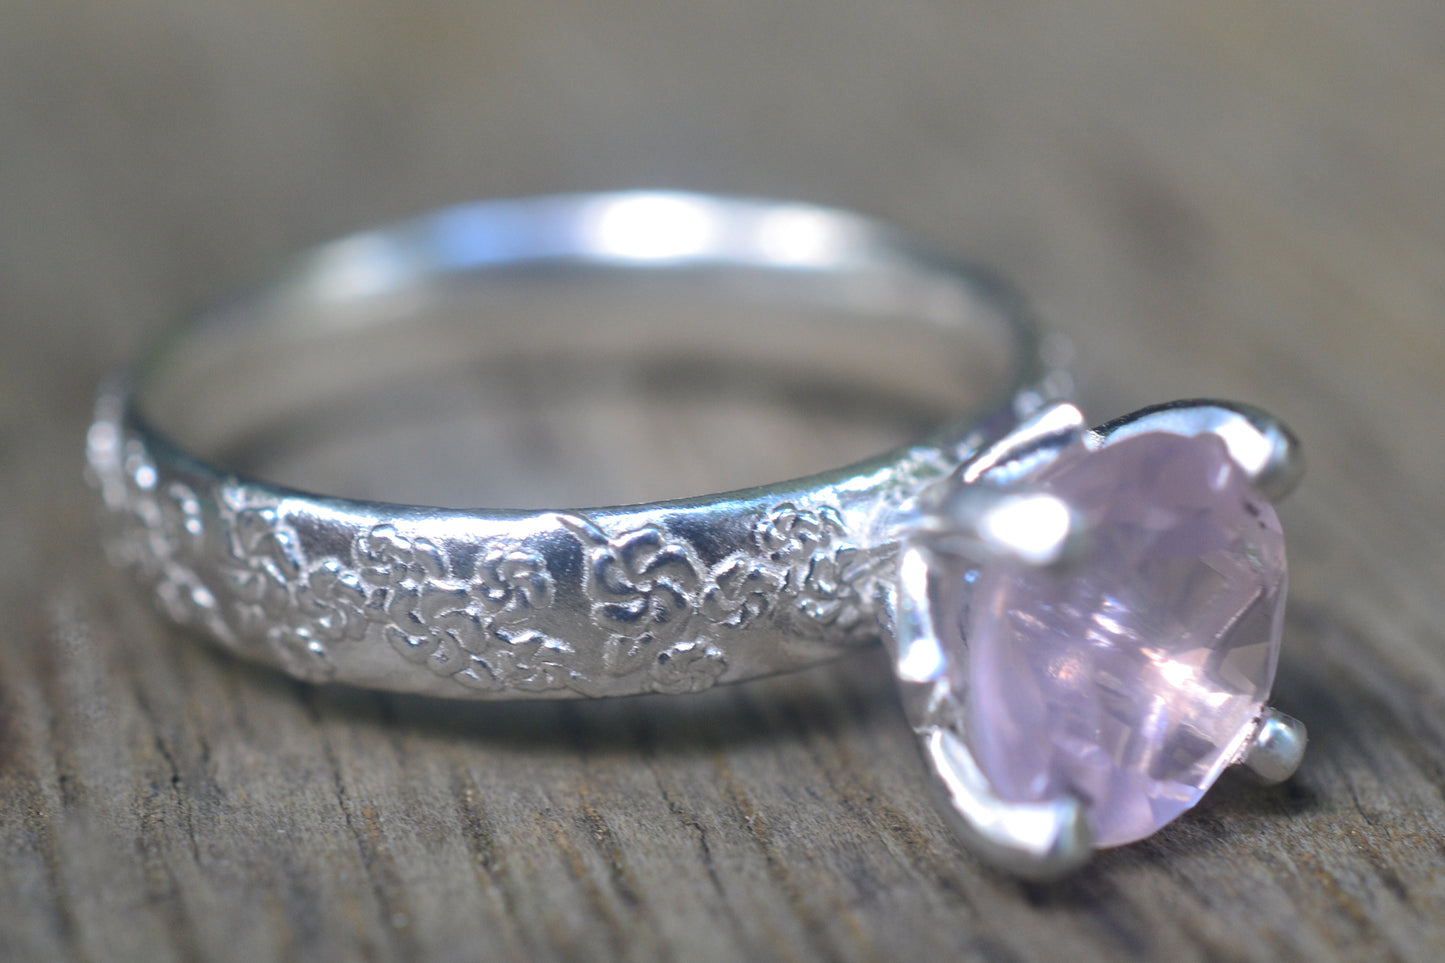 8mm Faceted Pink Quartz Ring in Sterling Silver